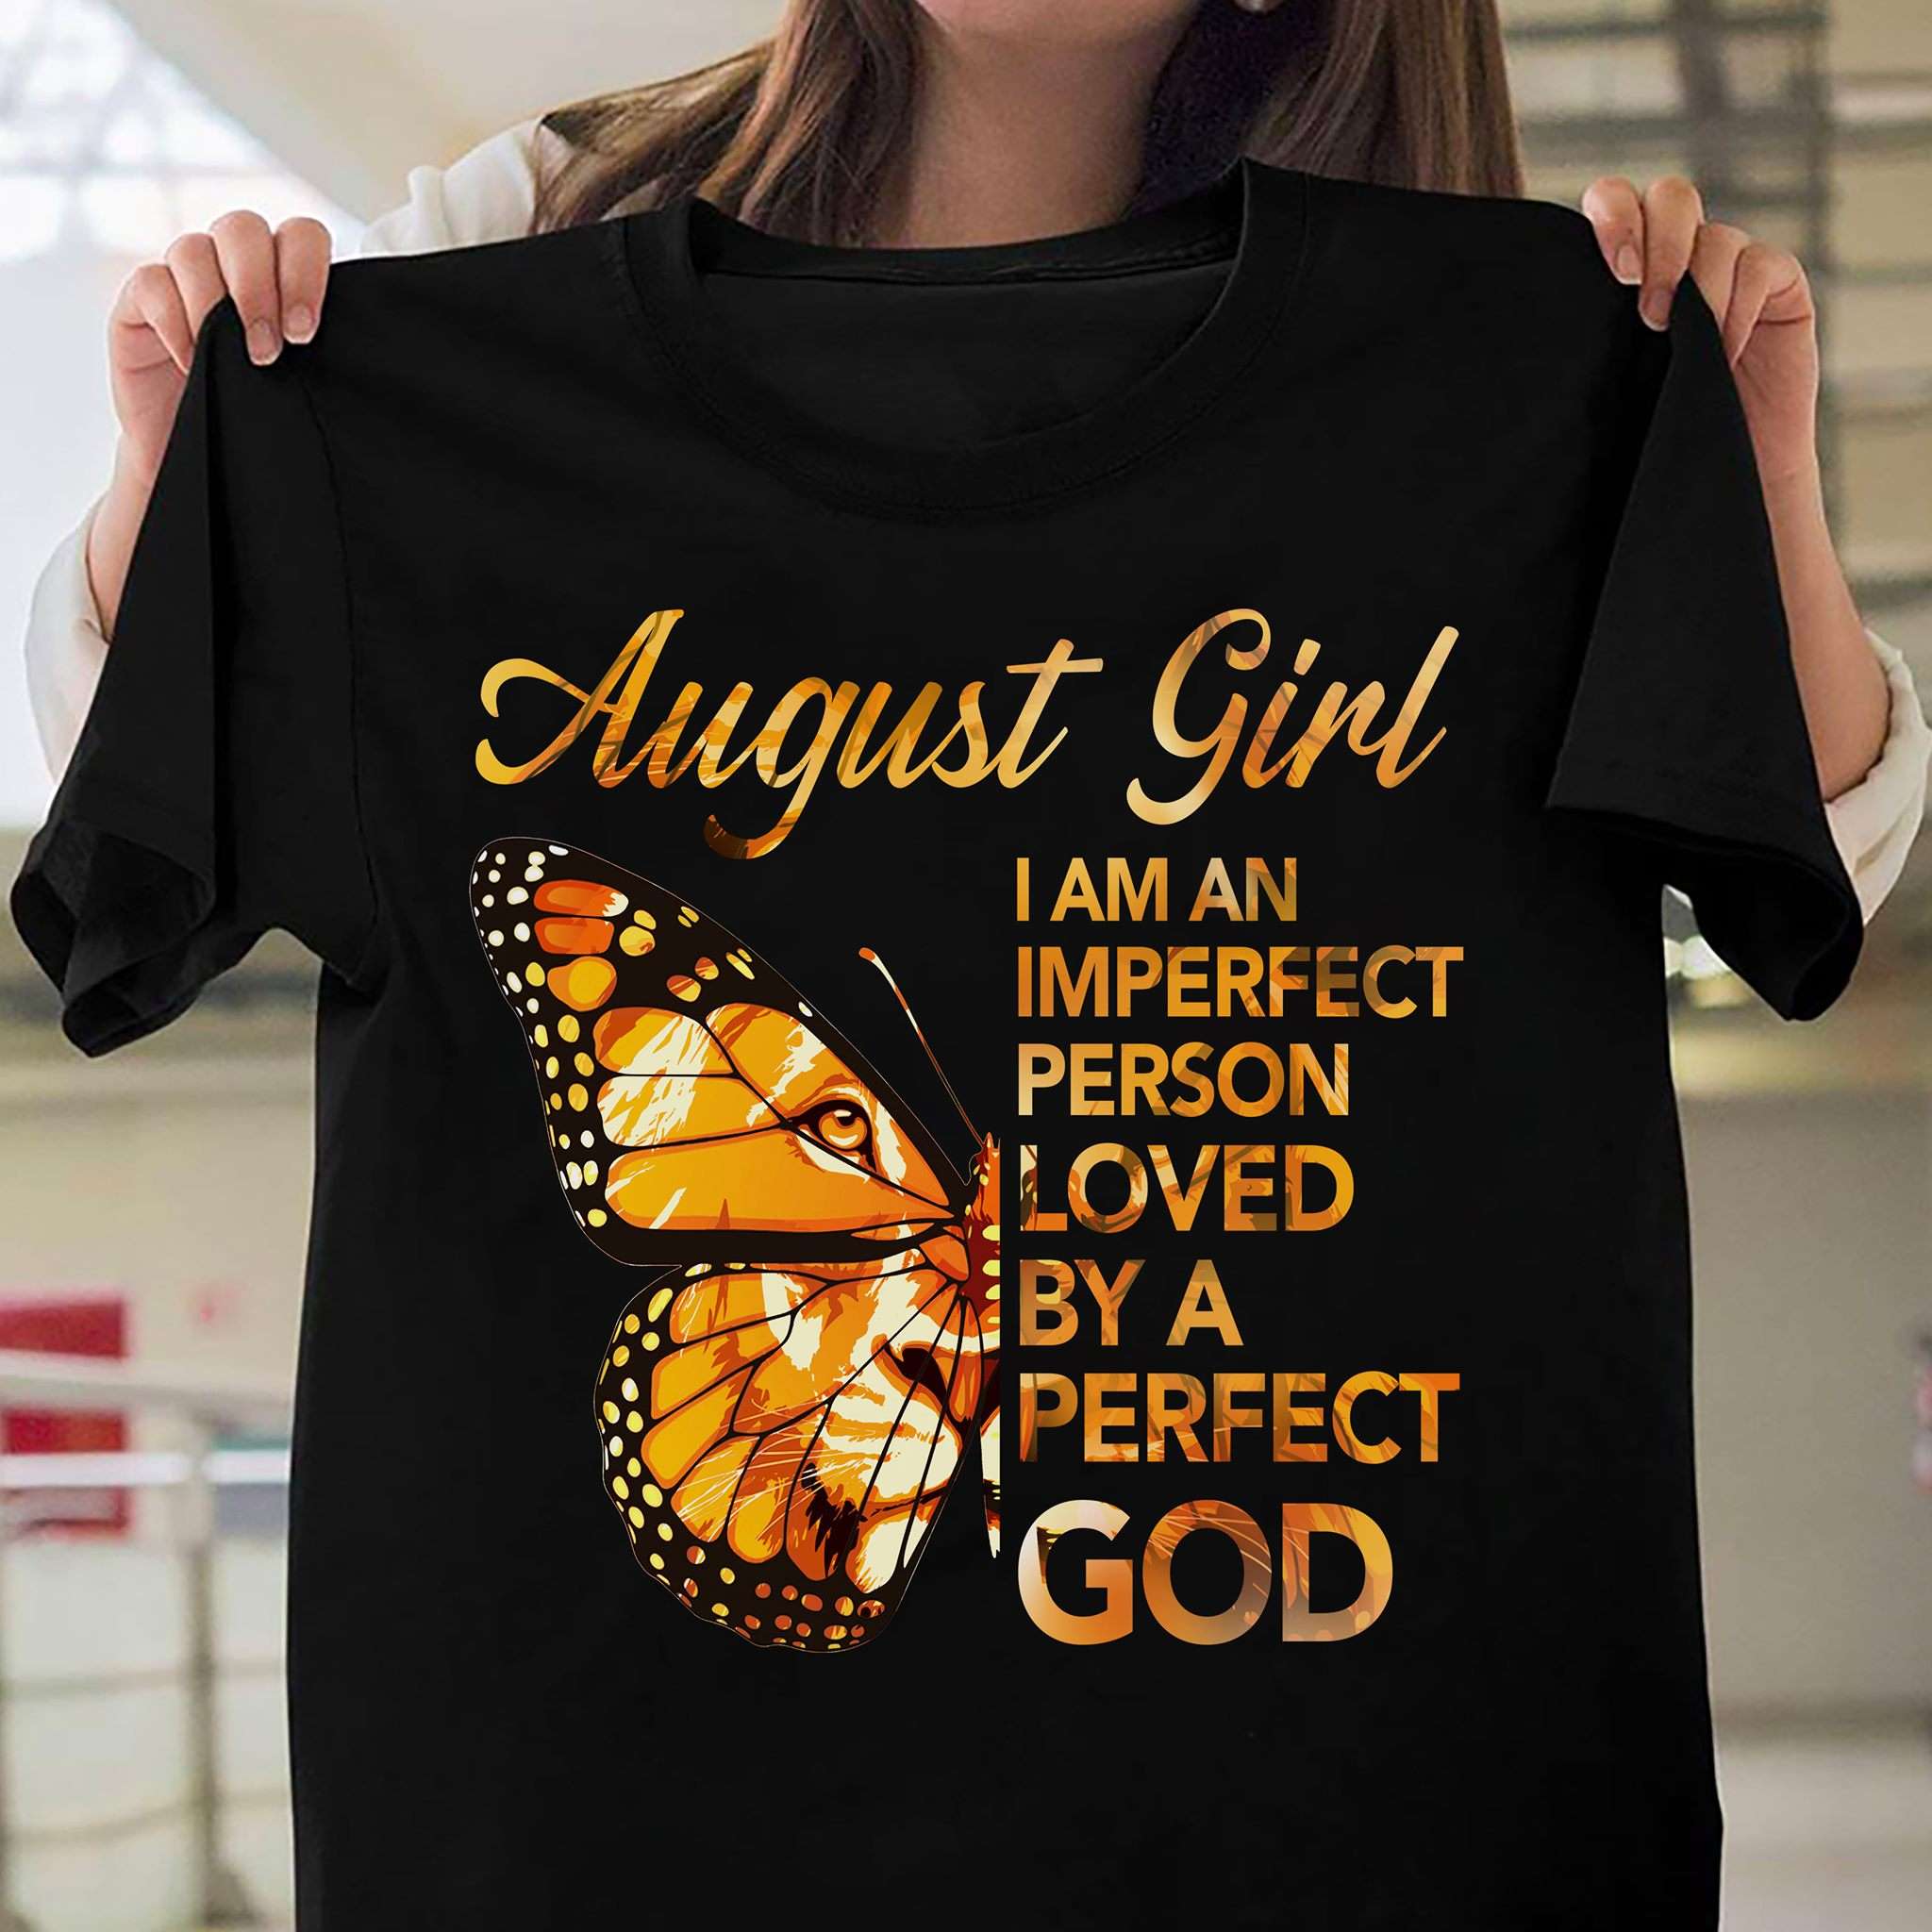 August Birthday Girl, Lion And Butterfly - August Girl i am an imperfect person loved by a perfect god